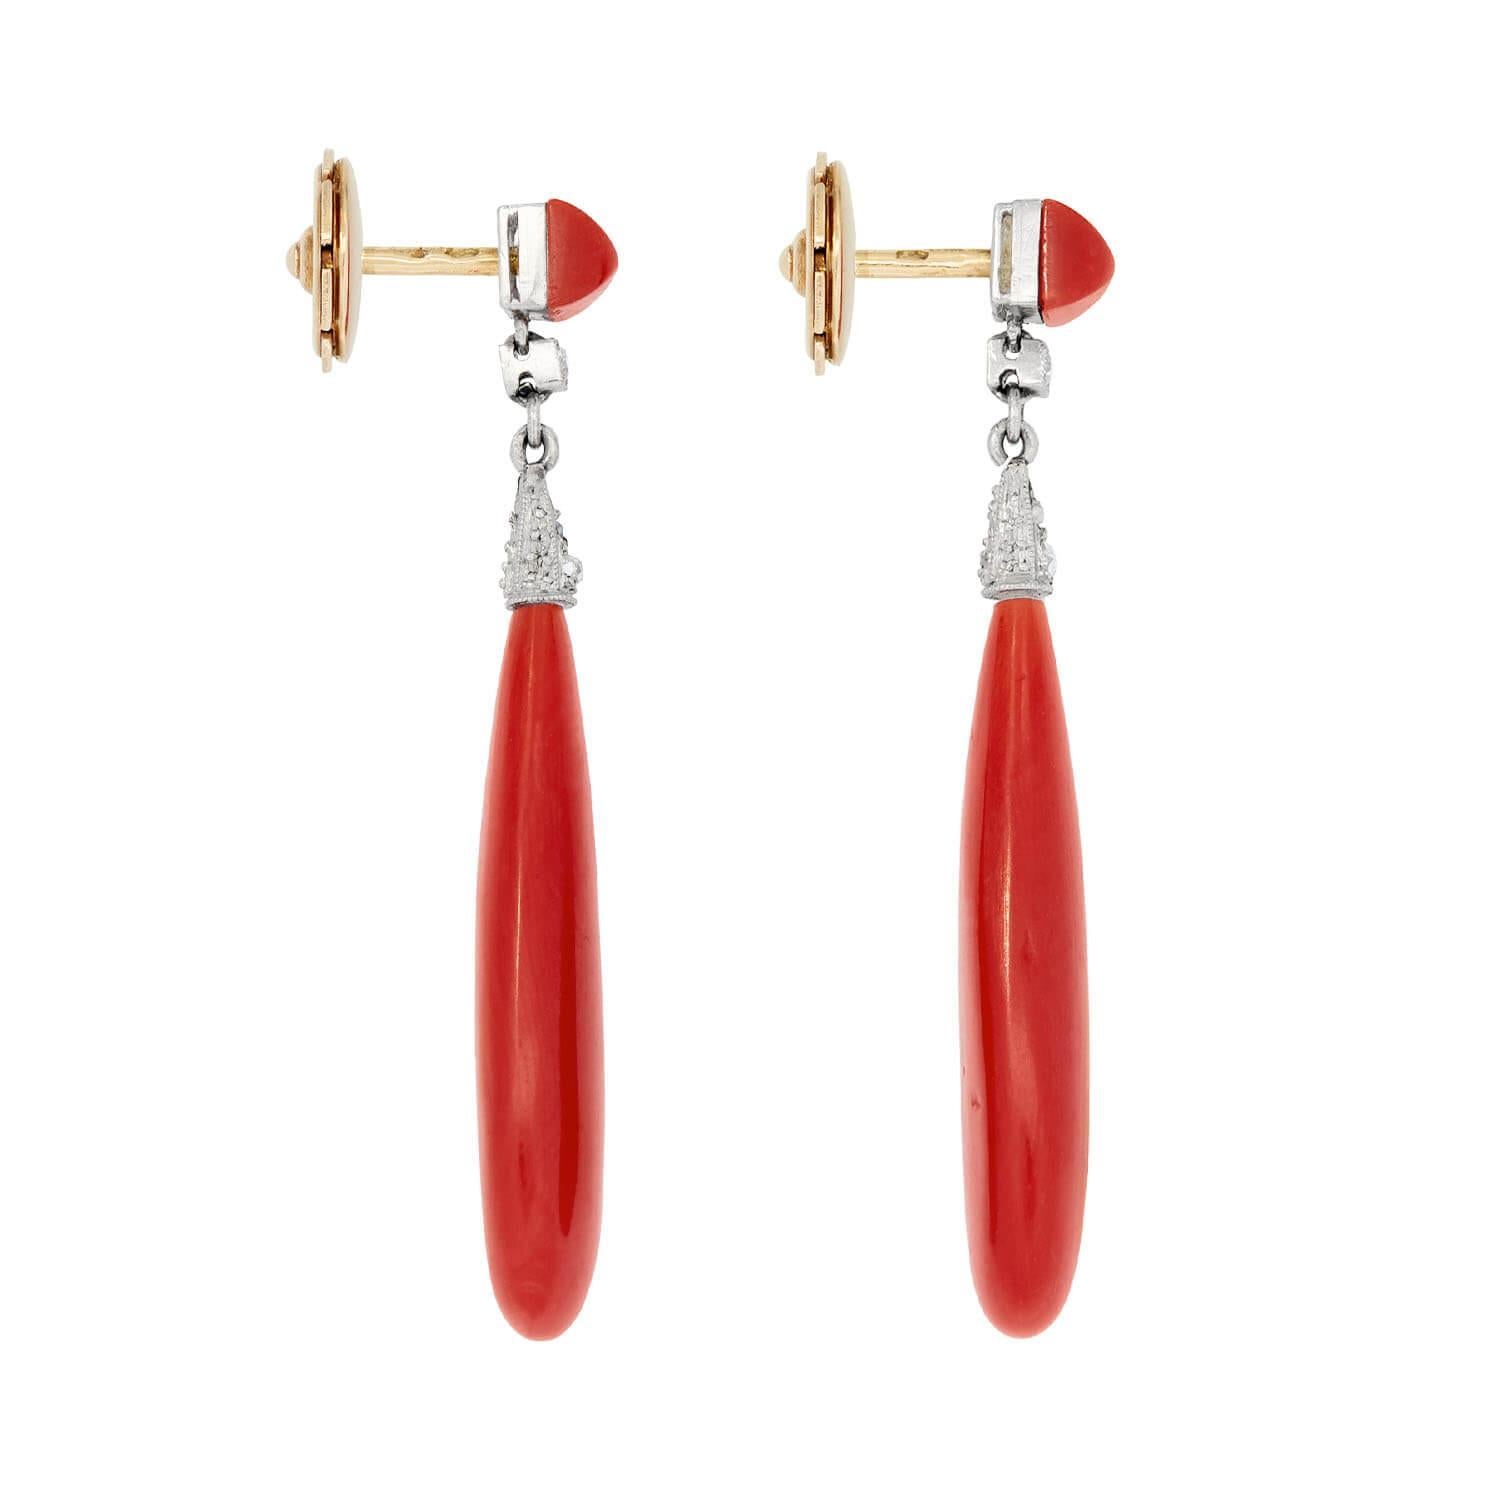 Wonderful coral earrings from the Art Deco (ca1920) era! Each earring begins with a vibrant squared coral cabochon surmount, which is set in a platinum bracket and affixed with new 18k yellow gold posts. Dangling from the coral bead surmount is a